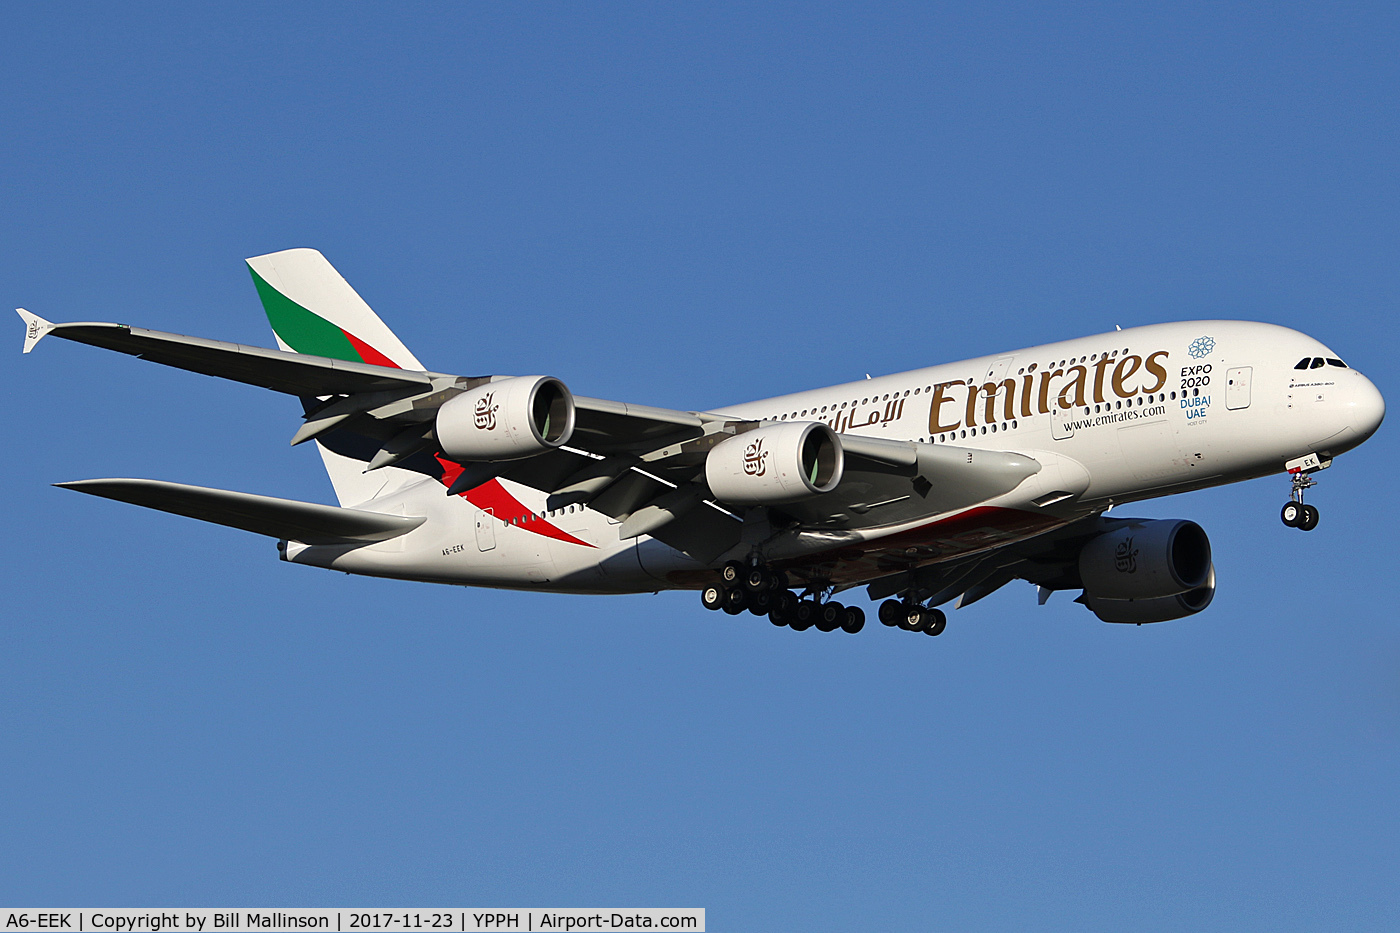 A6-EEK, 2013 Airbus A380-861 C/N 132, FINALS FOR 21